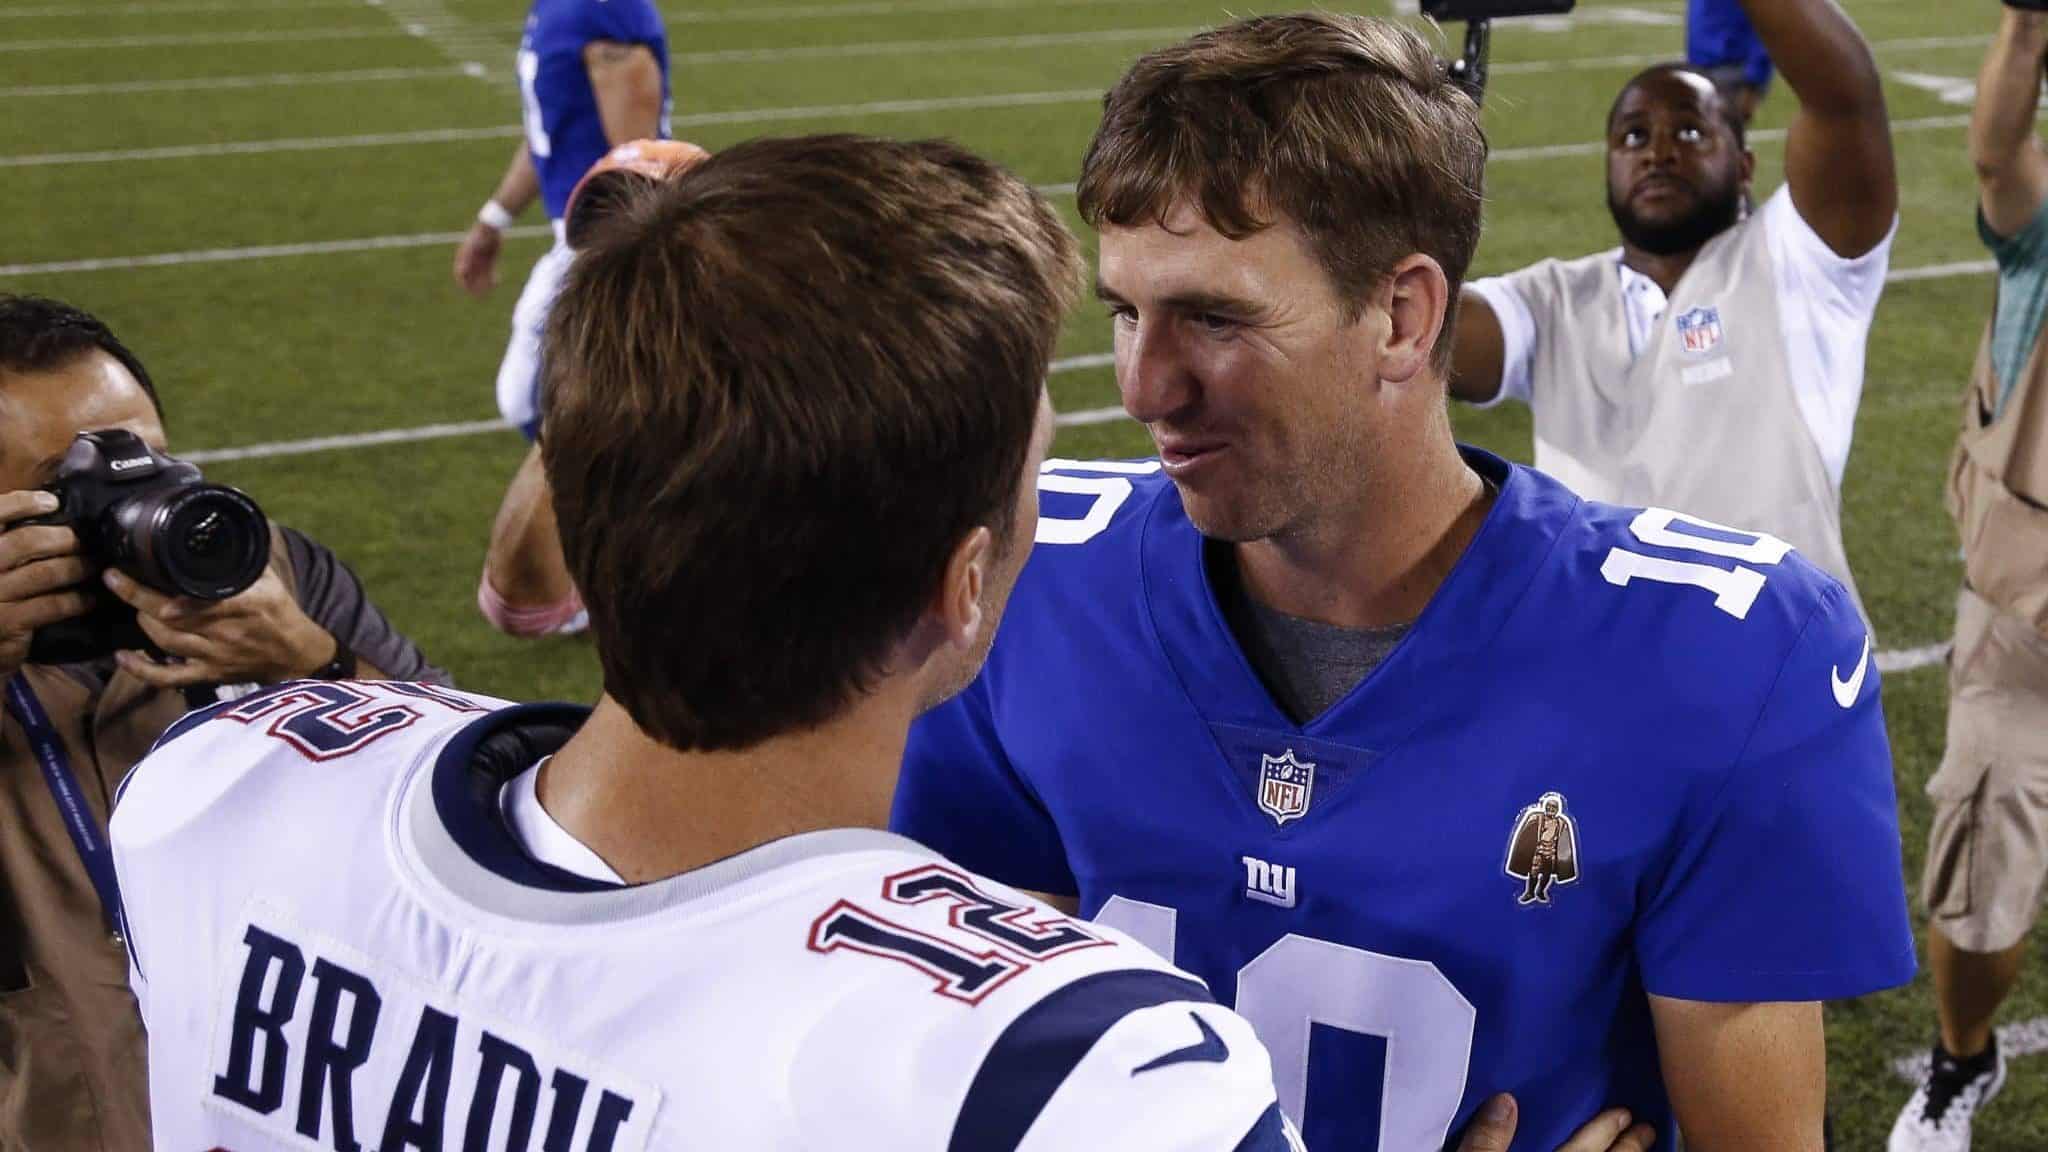 EAST RUTHERFORD, NJ - AUGUST 30: Eli Manning #10 of the New York Giants greets Tom Brady #12 of the New England Patriots after a pre-season NFL game at MetLife Stadium on August 30, 2018 in East Rutherford, New Jersey.